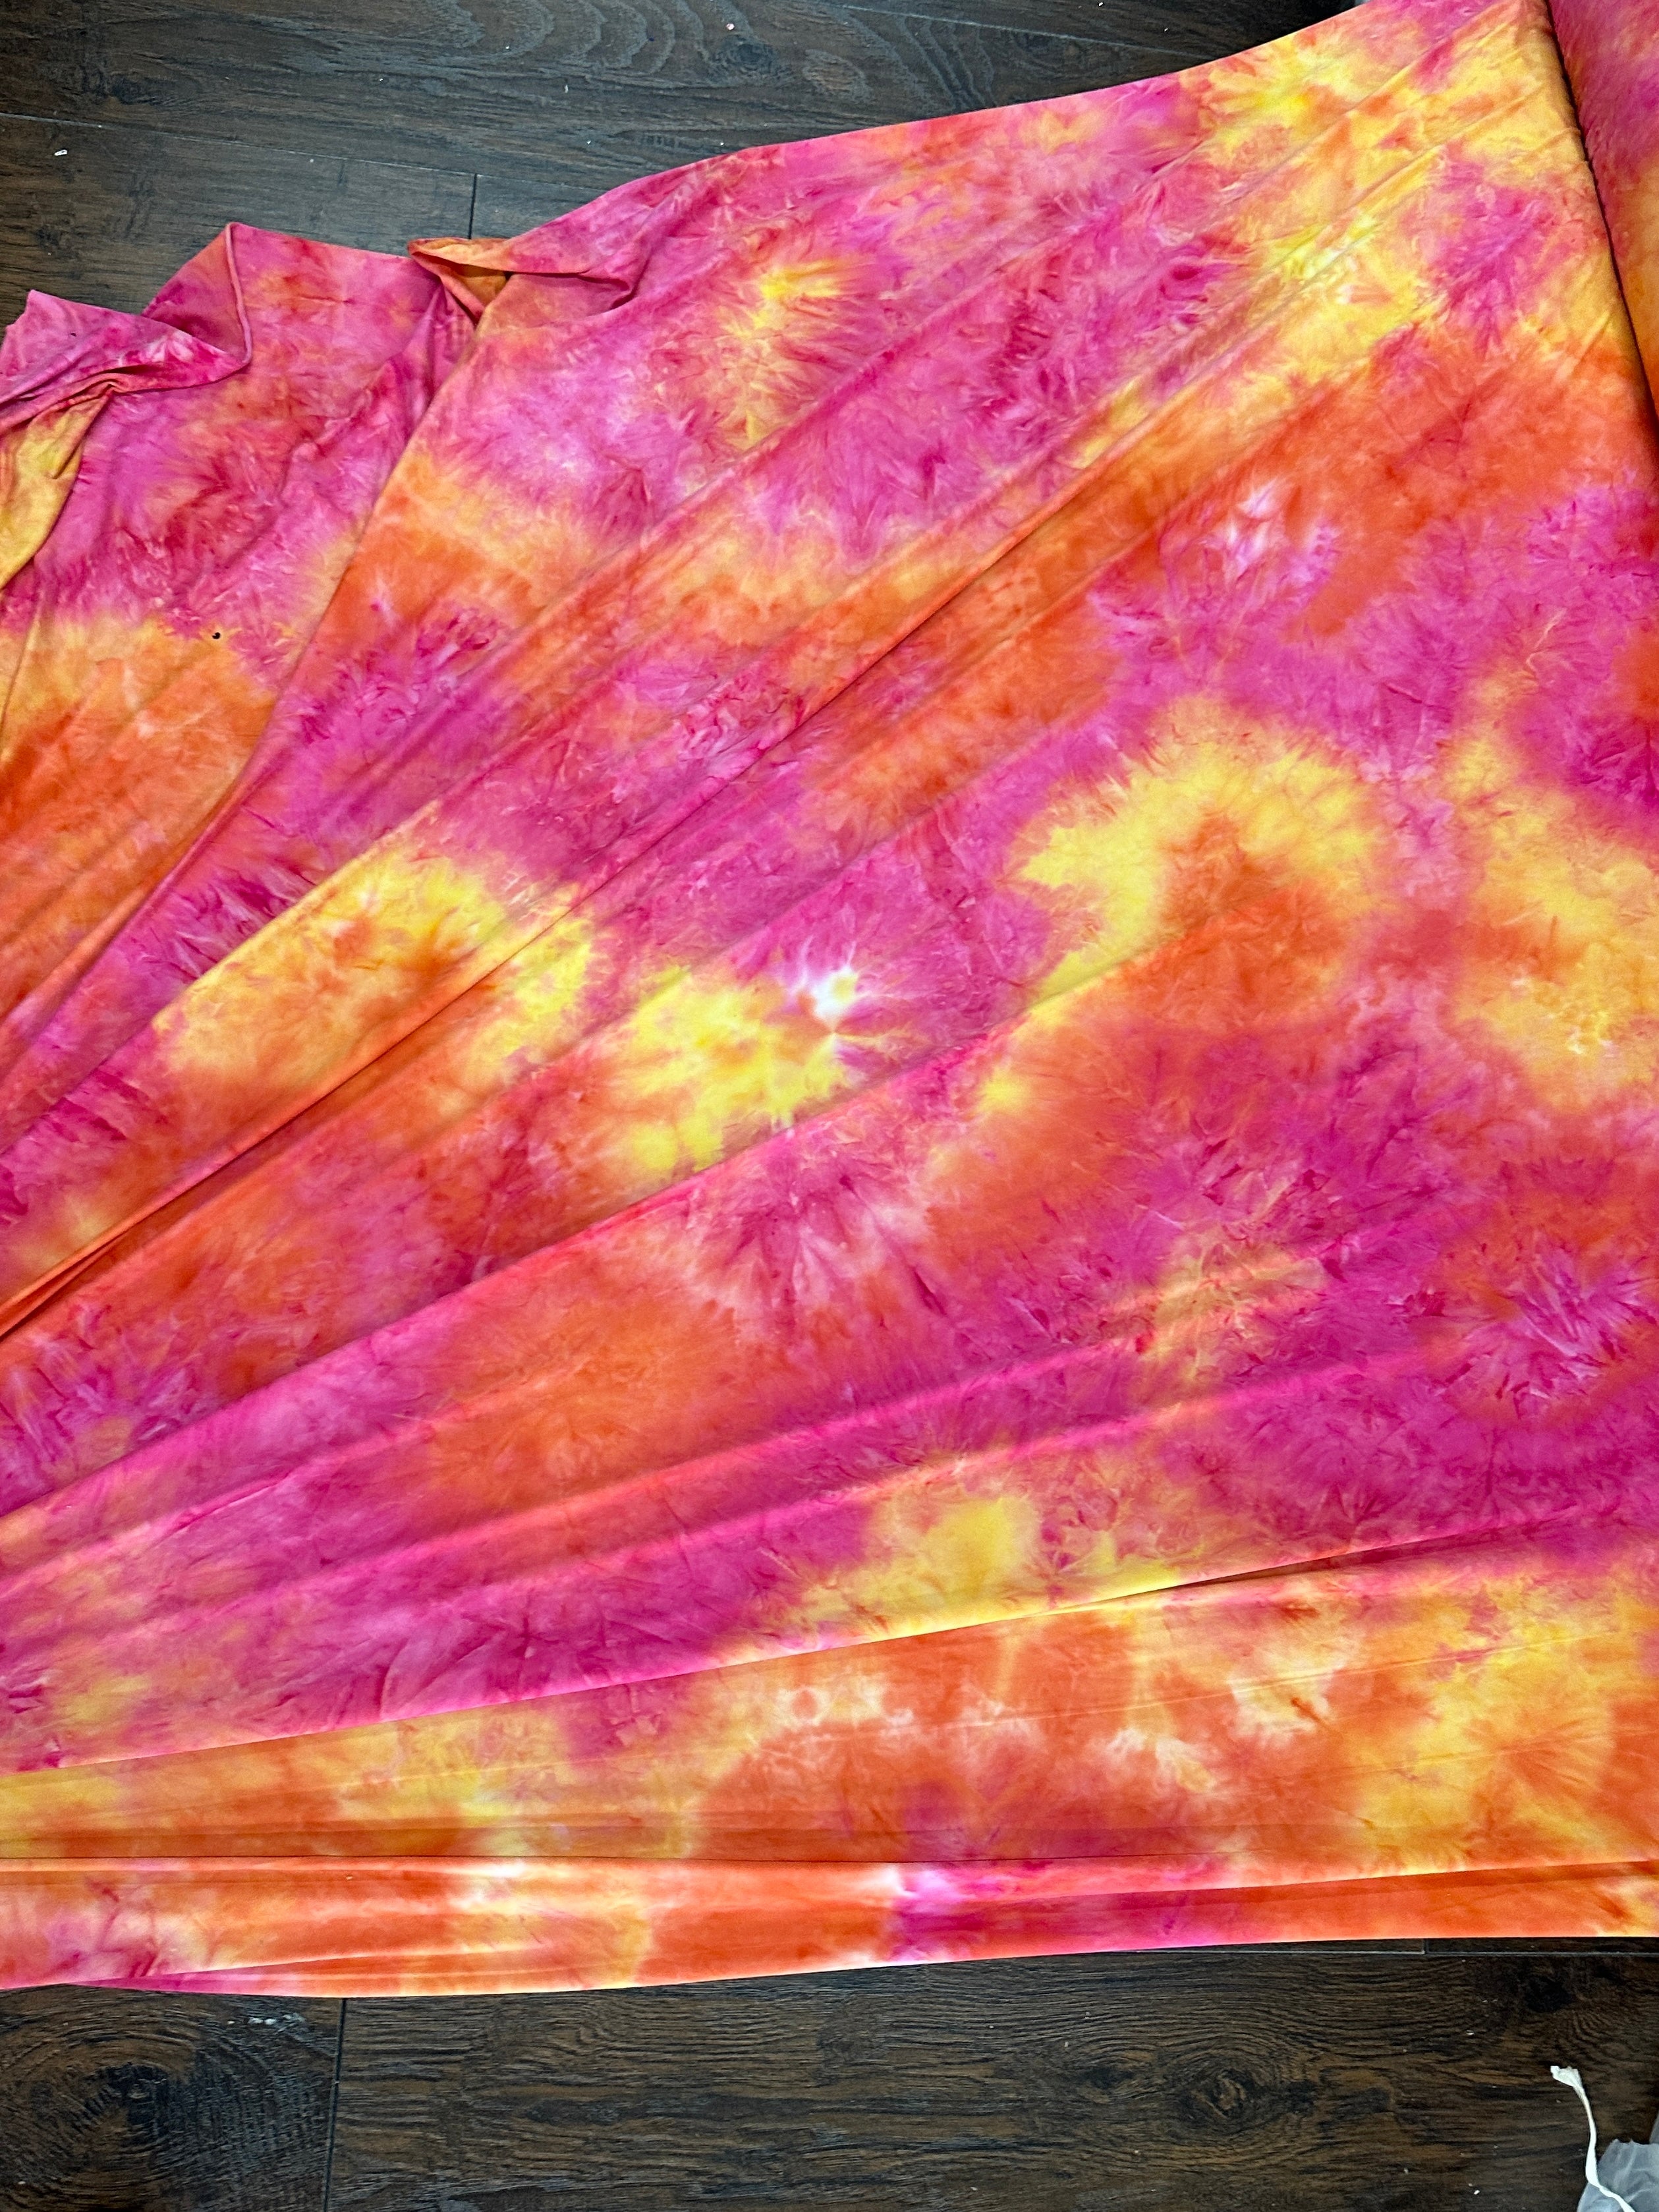  Hot Pink and Yellow Tie Dye Jersey Knit, tie dye jersey knit for woman, tie dye jersey knit for party wear, tie dye jersey knit for gown, tie dye jersey knit for bride, tie dye jersey knit on discount, tie dye jersey knit on sale, premium tie dye jersey knit 